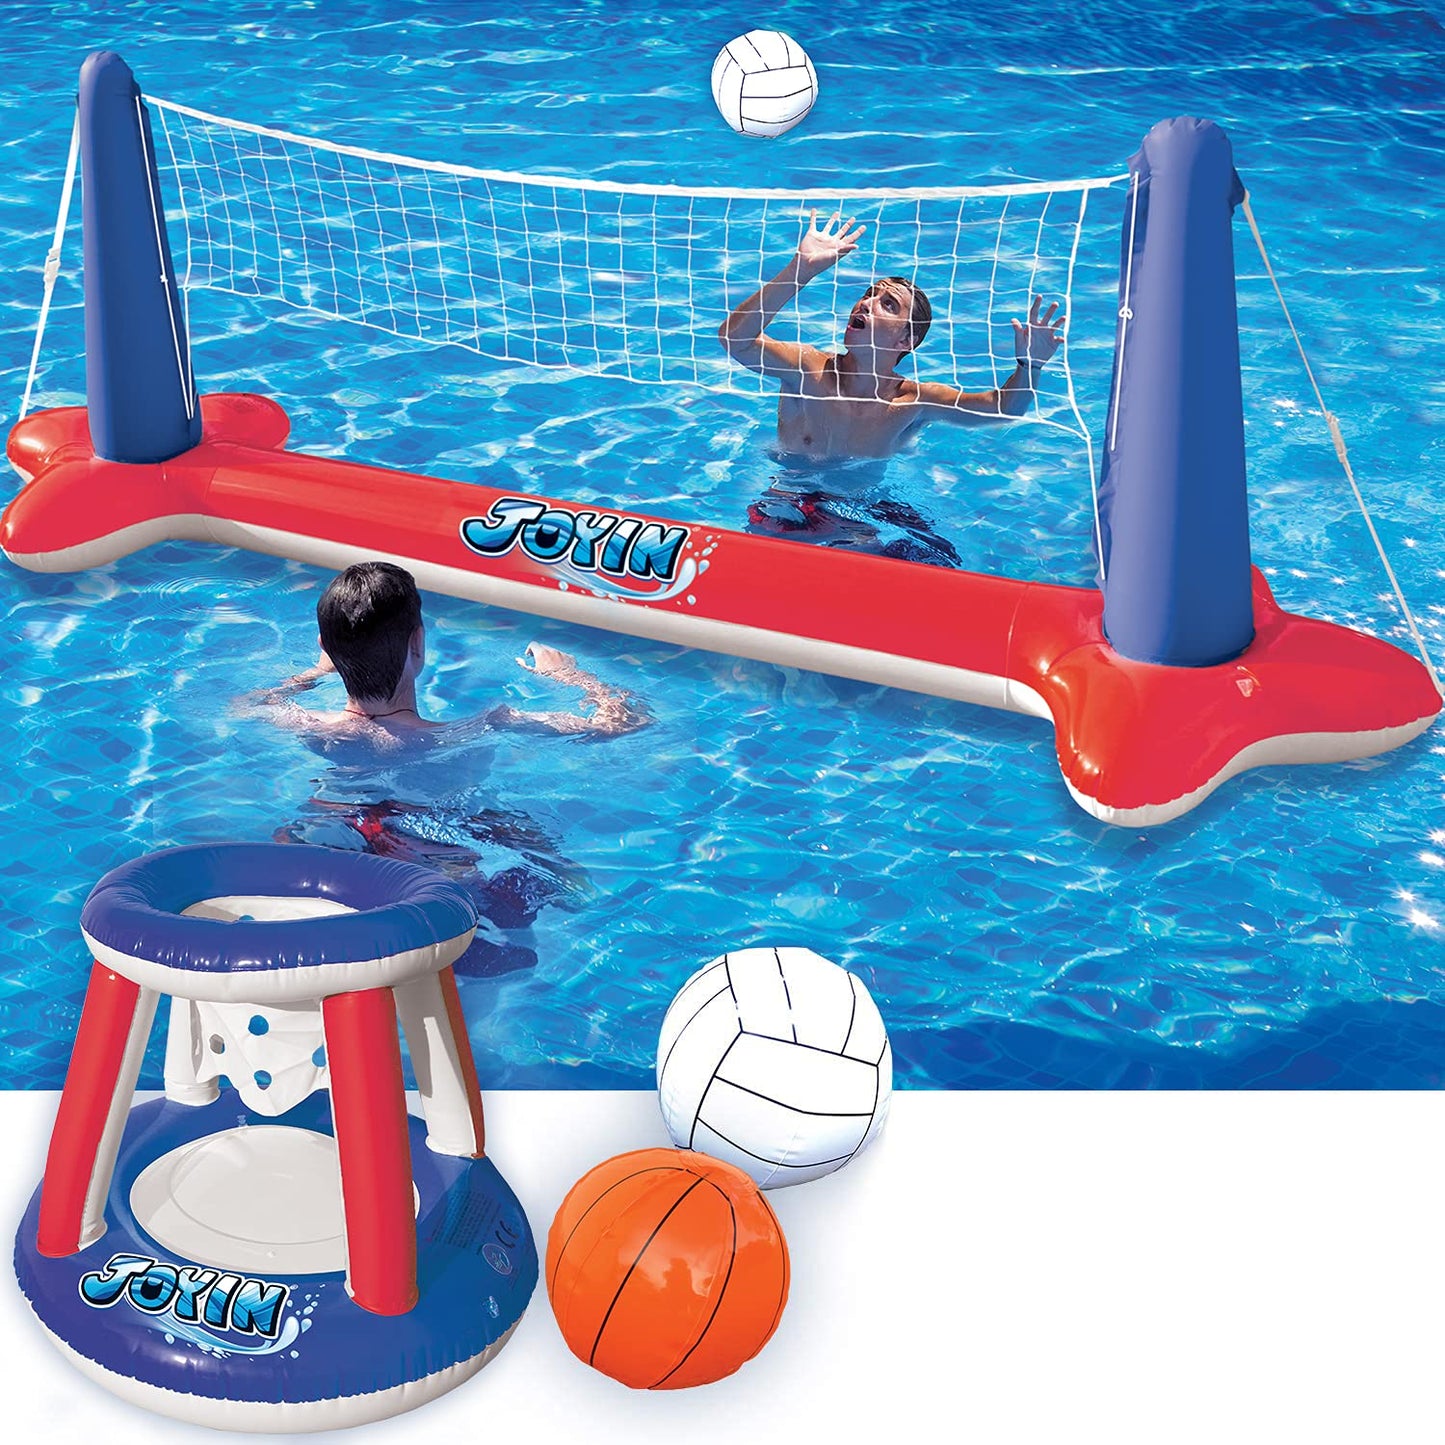 Sloosh Inflatable Pool Float Set Volleyball Net & Basketball Hoops, Balls Included for Kids and Adults Swimming Game Toy, Summer Floaties, Volleyball Court |Basketball,Red Red